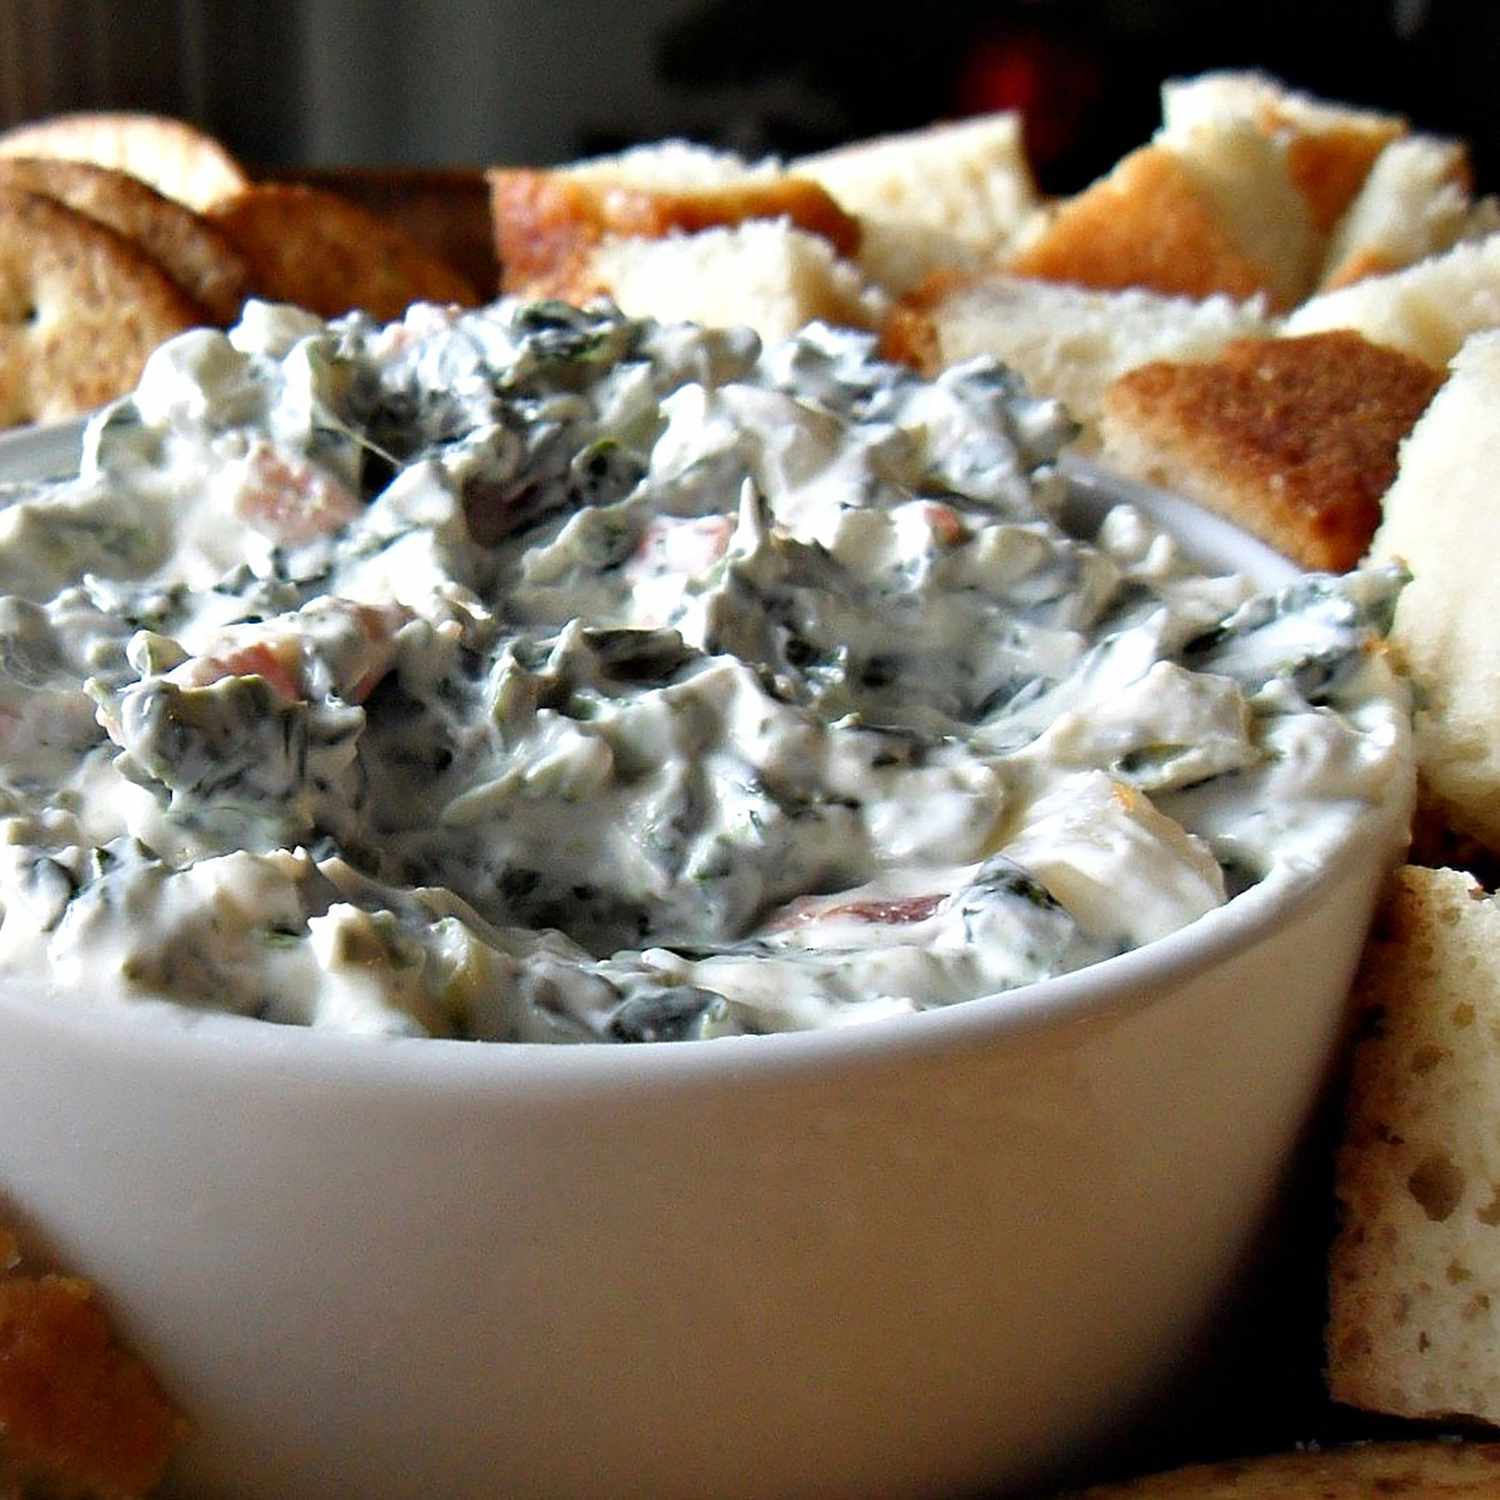 Close up view of spinach dip in a bowl, with bread cubes and crackers on the side